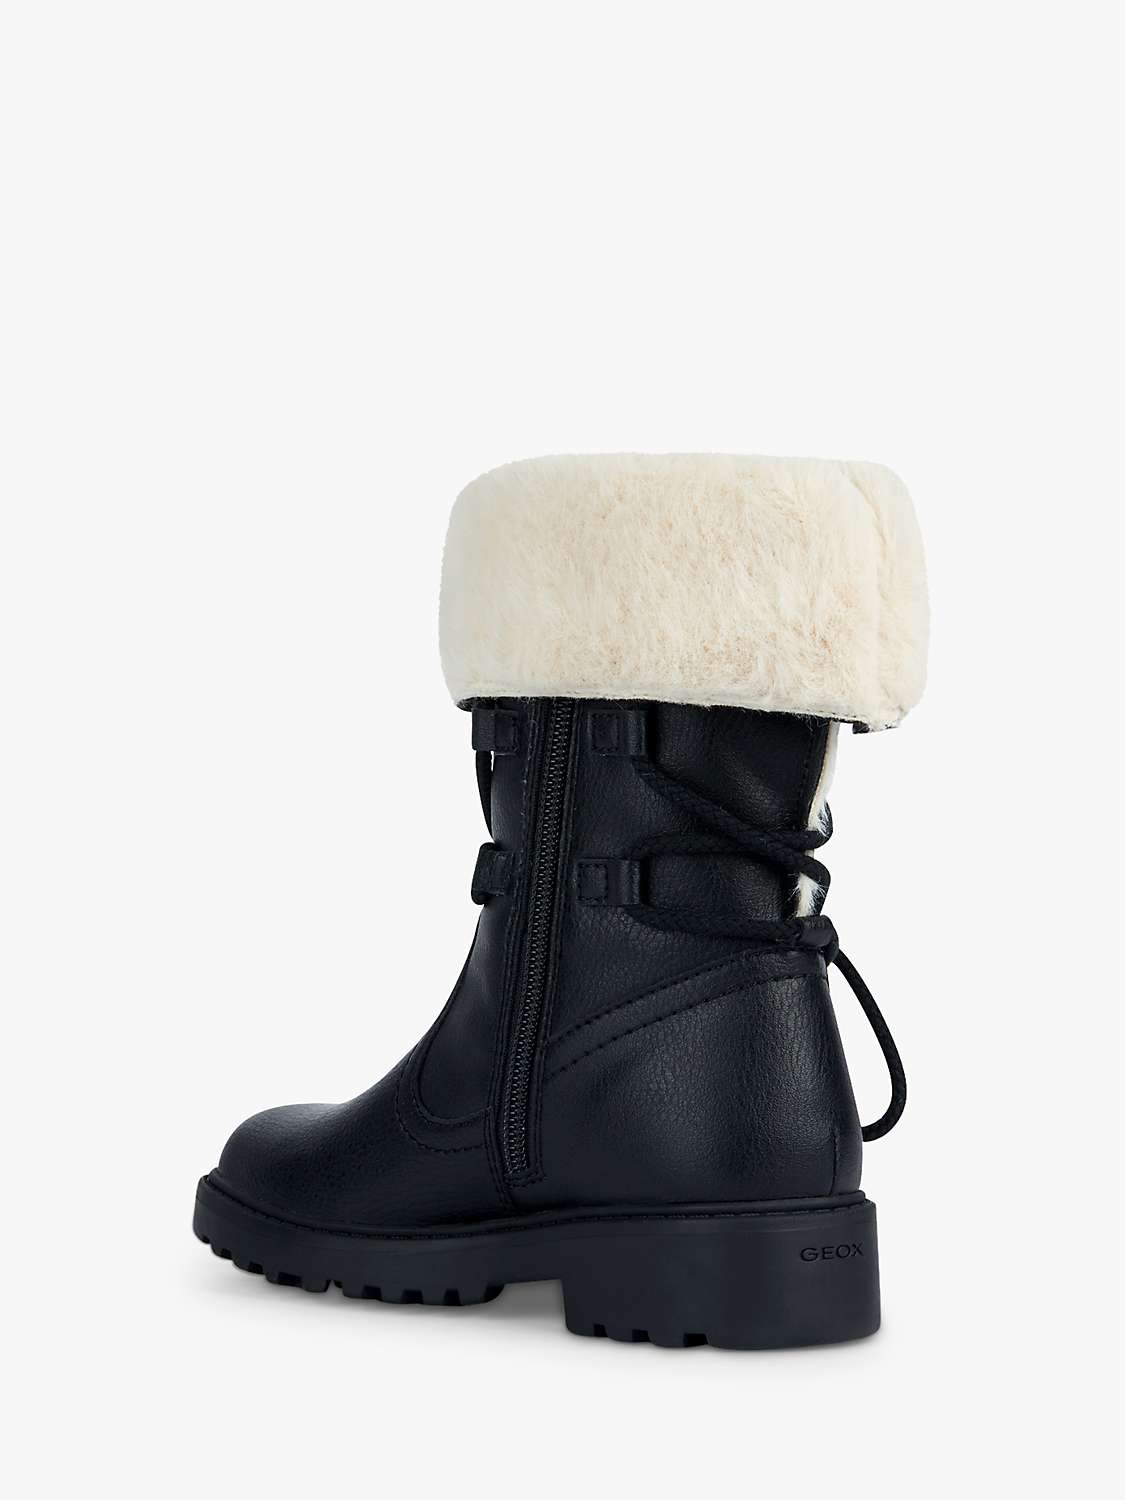 Buy Geox Kids' J Casey ABX Waterproof Faux Leather Boots Online at johnlewis.com